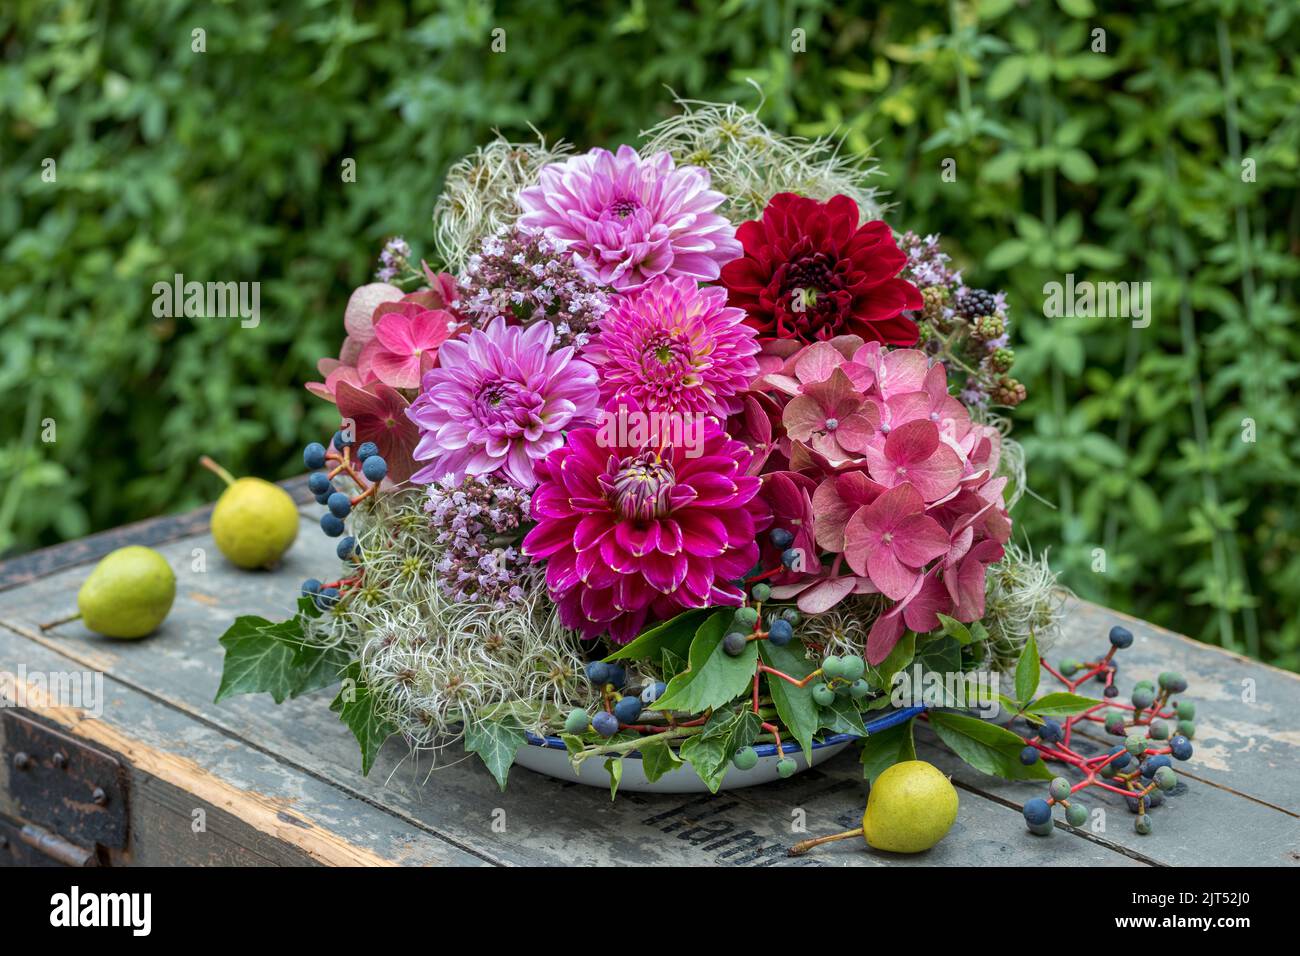 floral arrangement with dahlias, hydrangea flowers, clematis fruit stands and wild wine berries Stock Photo